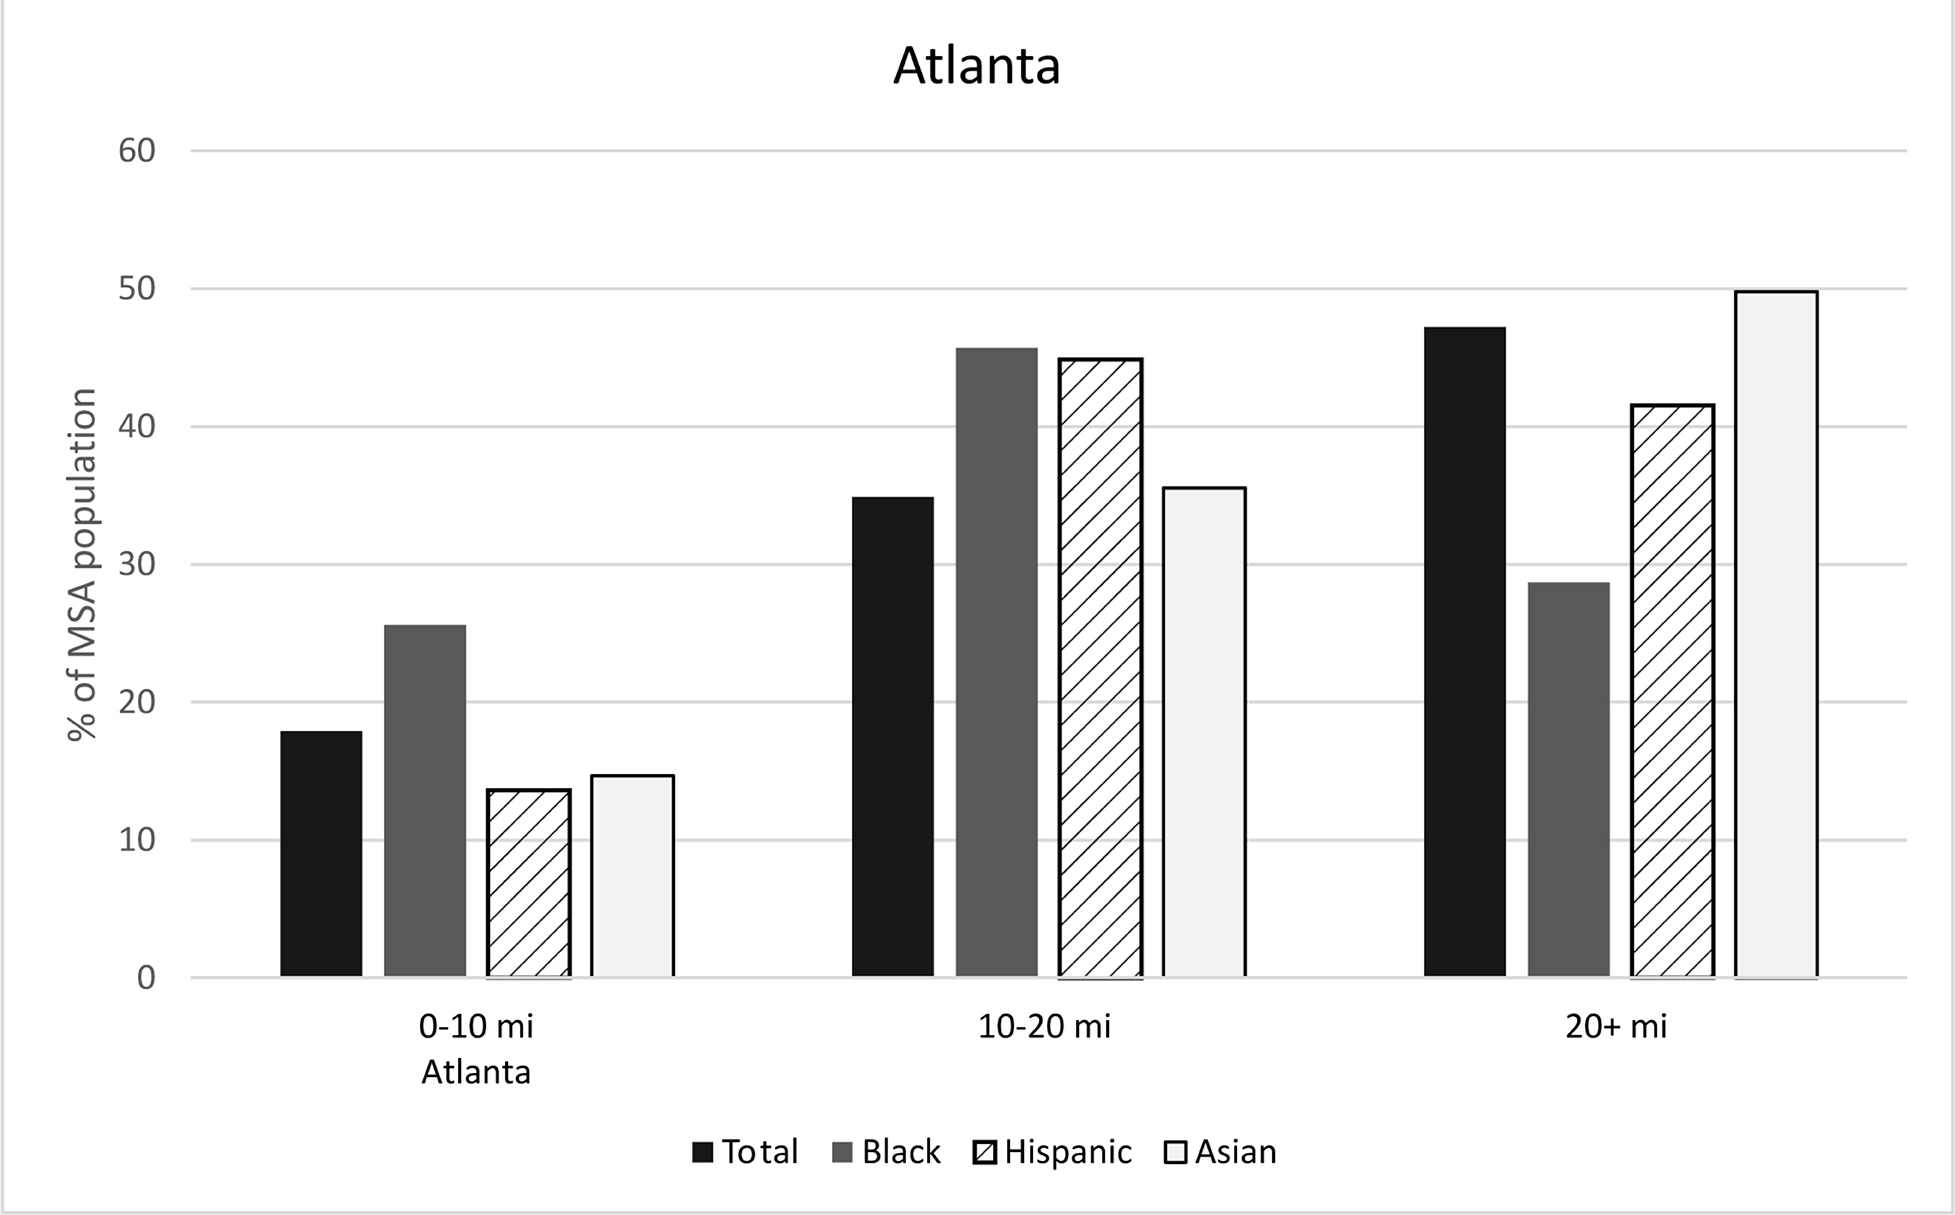 Figure 5: Racial/ethnic concentration by distance to CBD, Atlanta. See accessible link for data.